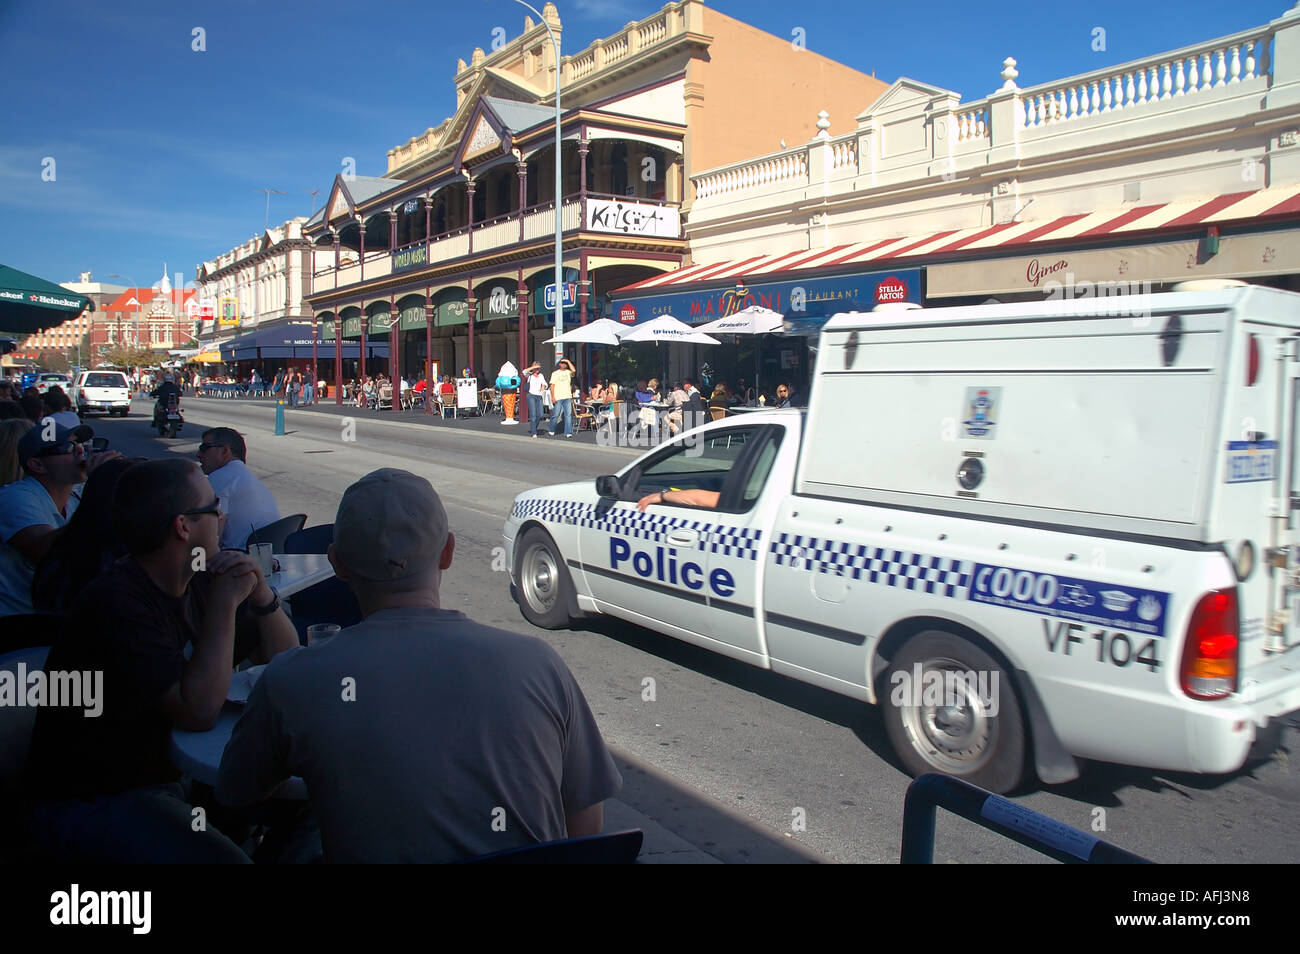 Police van cruises the street between busy outdoor cafes Fremantle Perth Western Australia No PR or MR Stock Photo